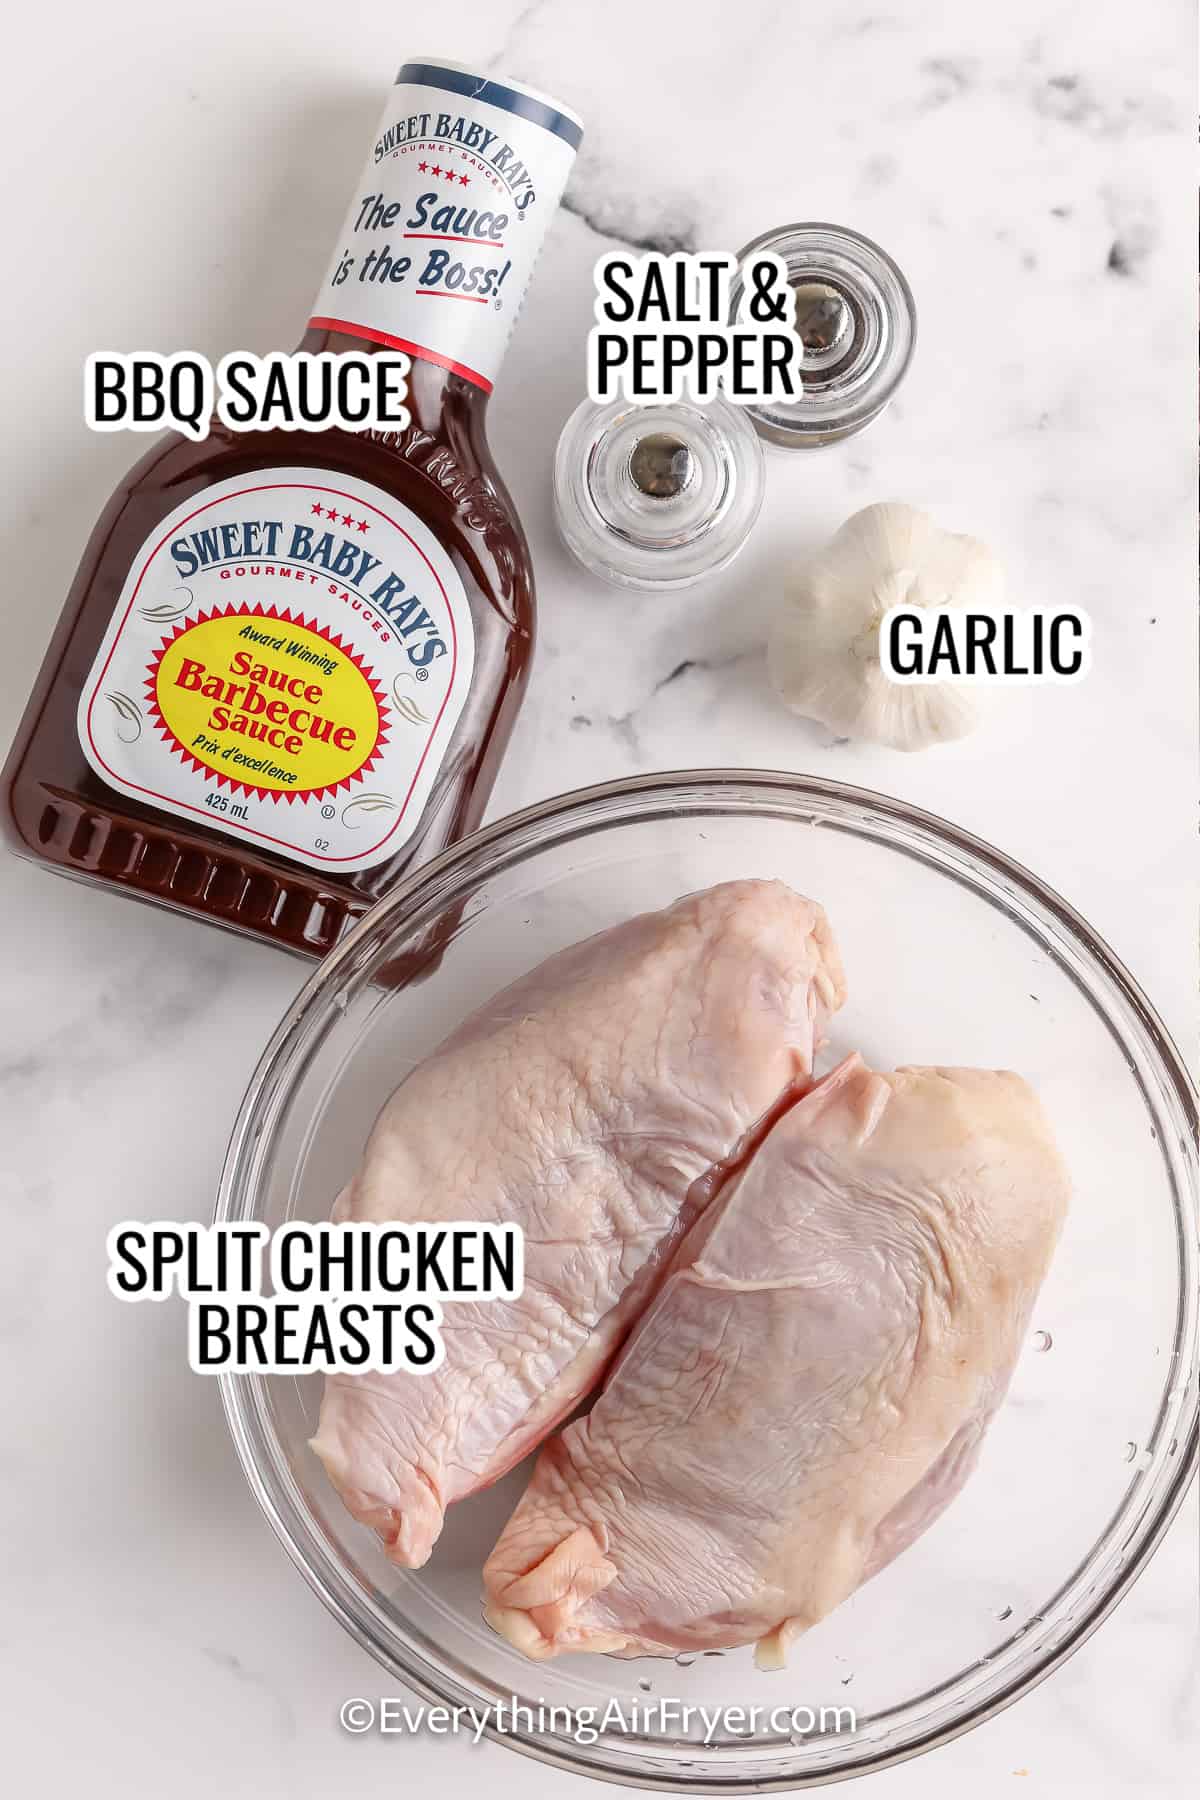 ingredients assembled to make air fryer bbq chicken breasts including bbq sauce, chicken breast, salt and pepper, and garlic